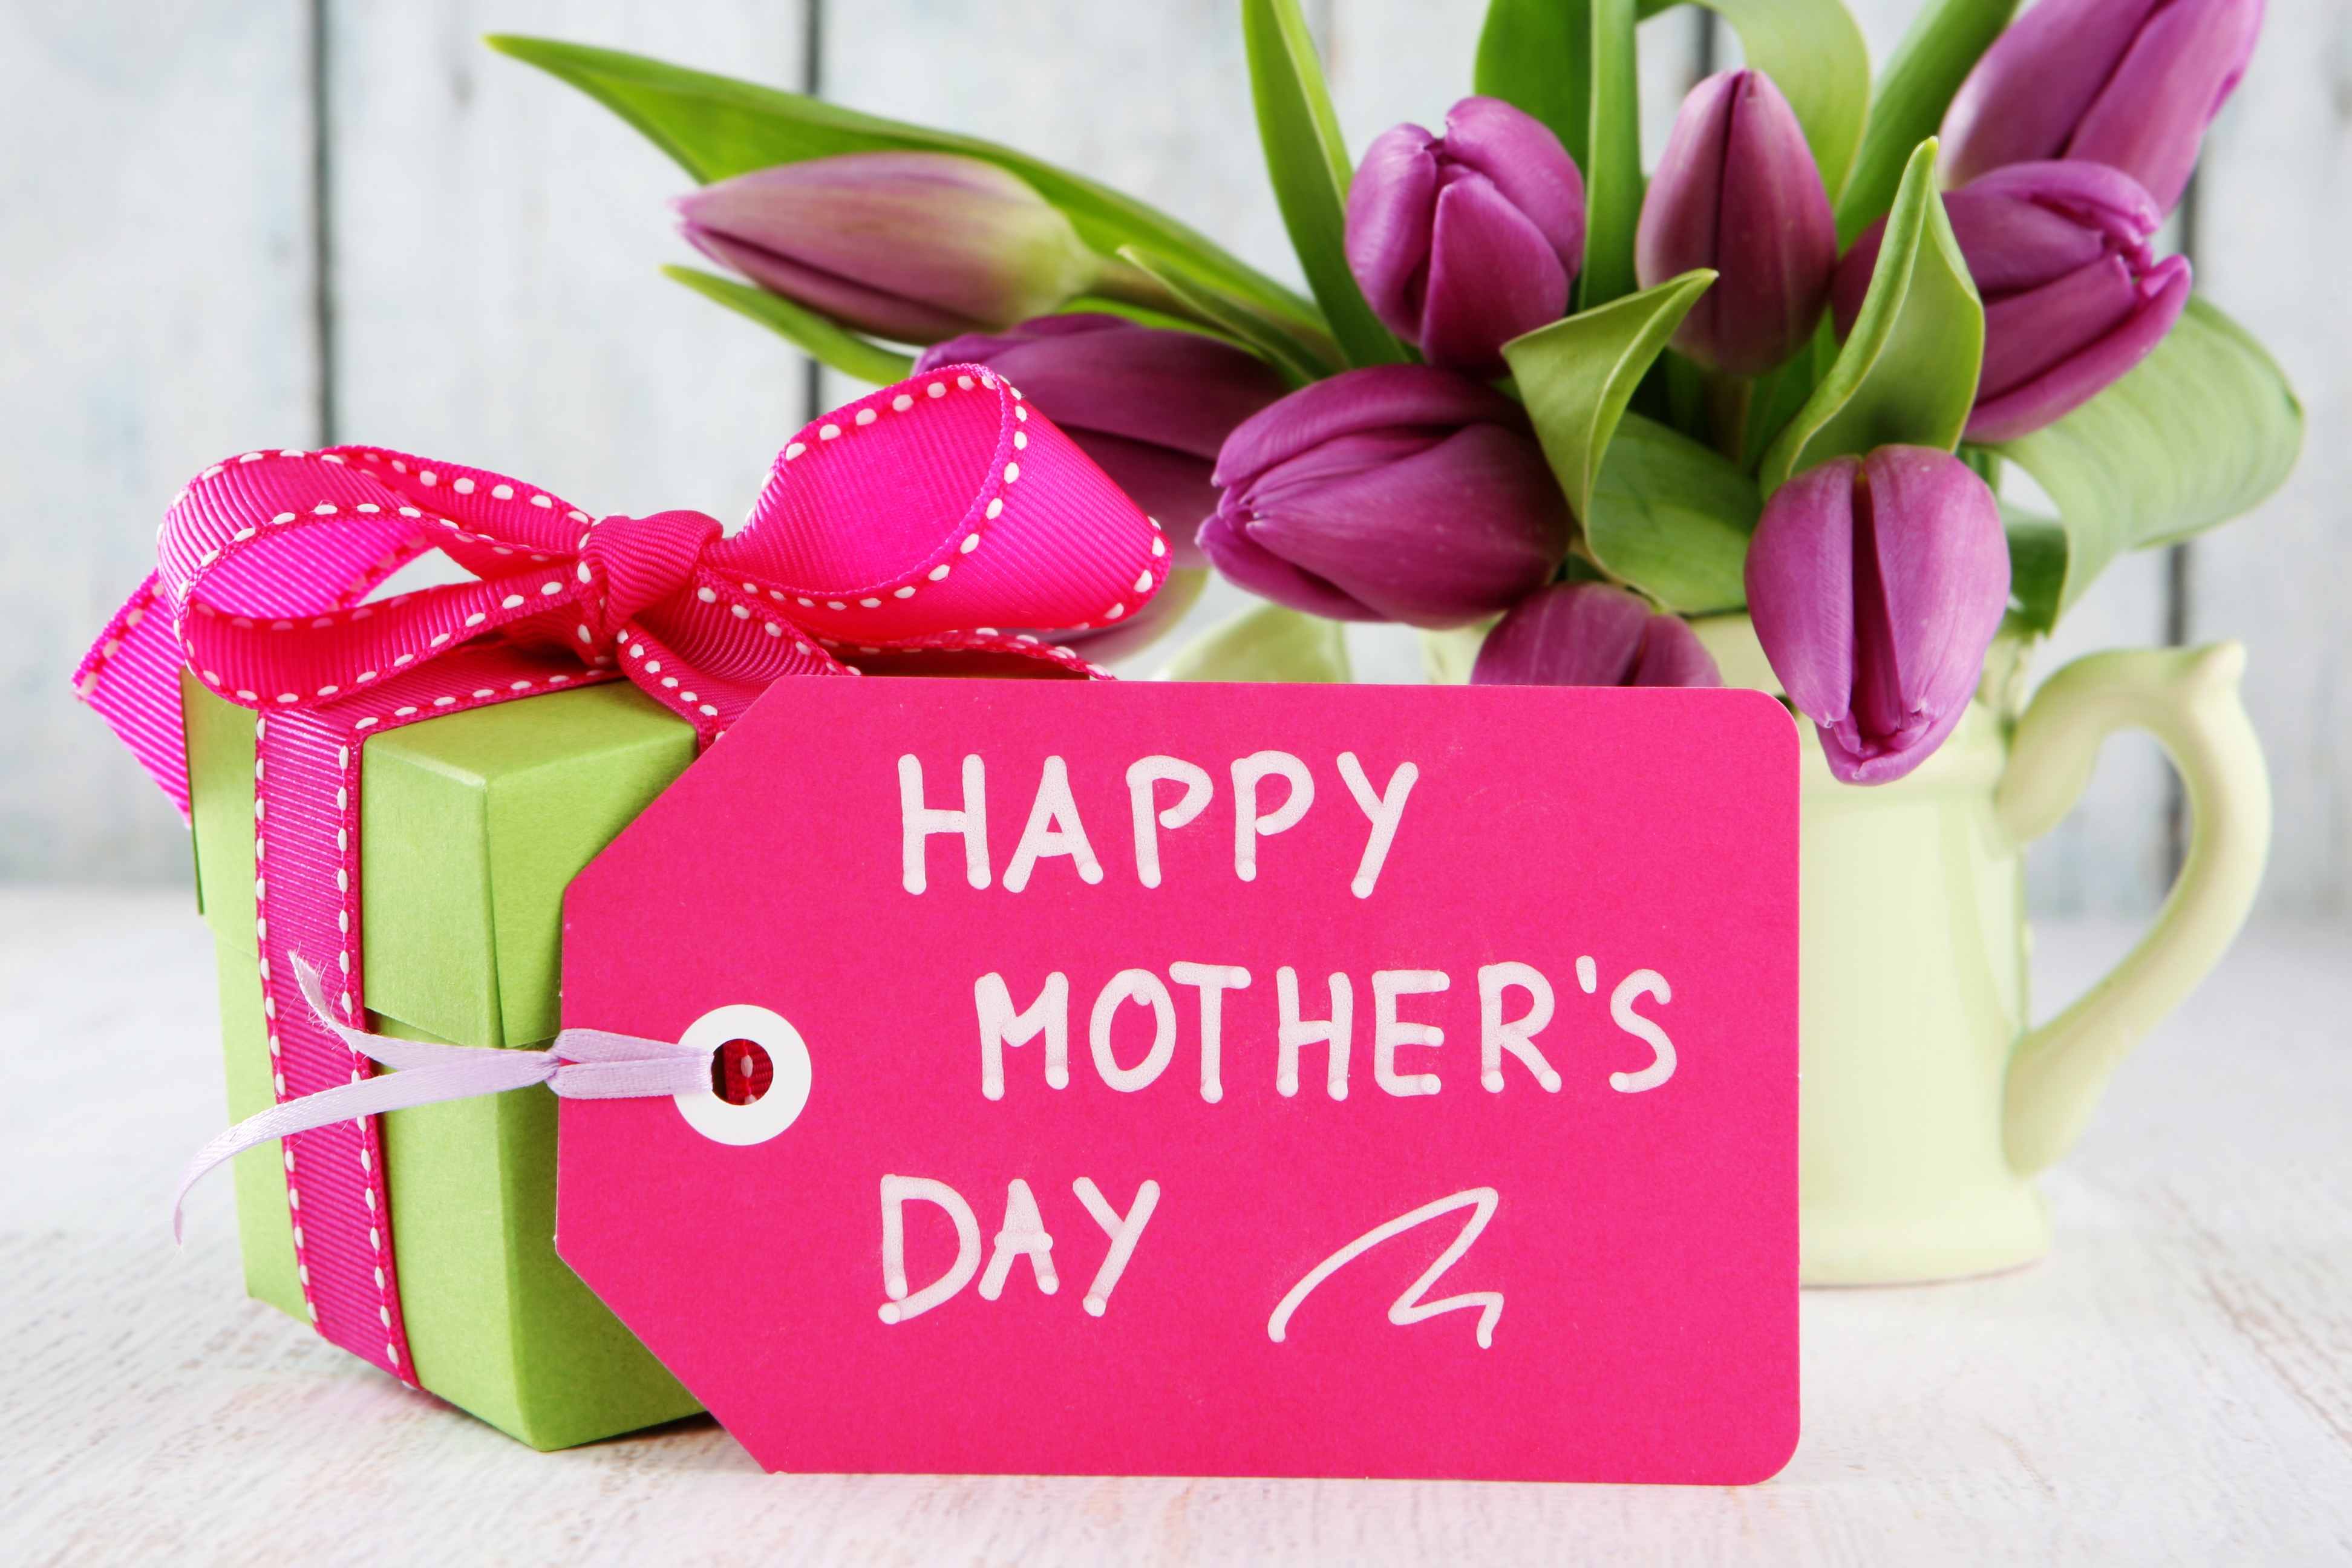 Happy Mothers Day Image Wallpaper Pictures